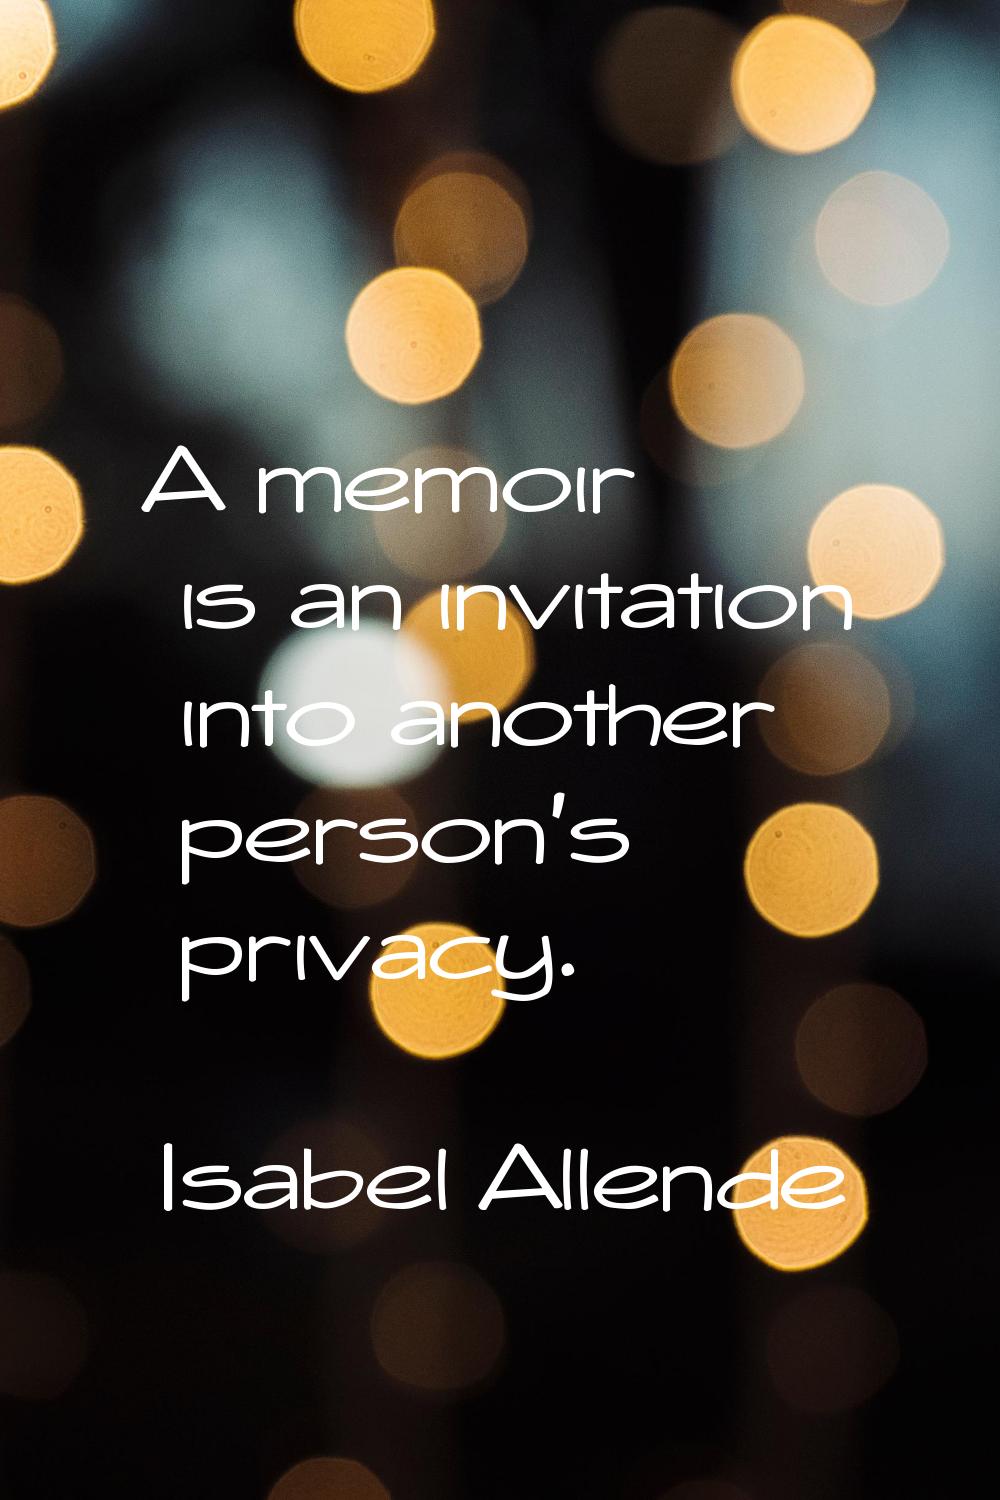 A memoir is an invitation into another person's privacy.